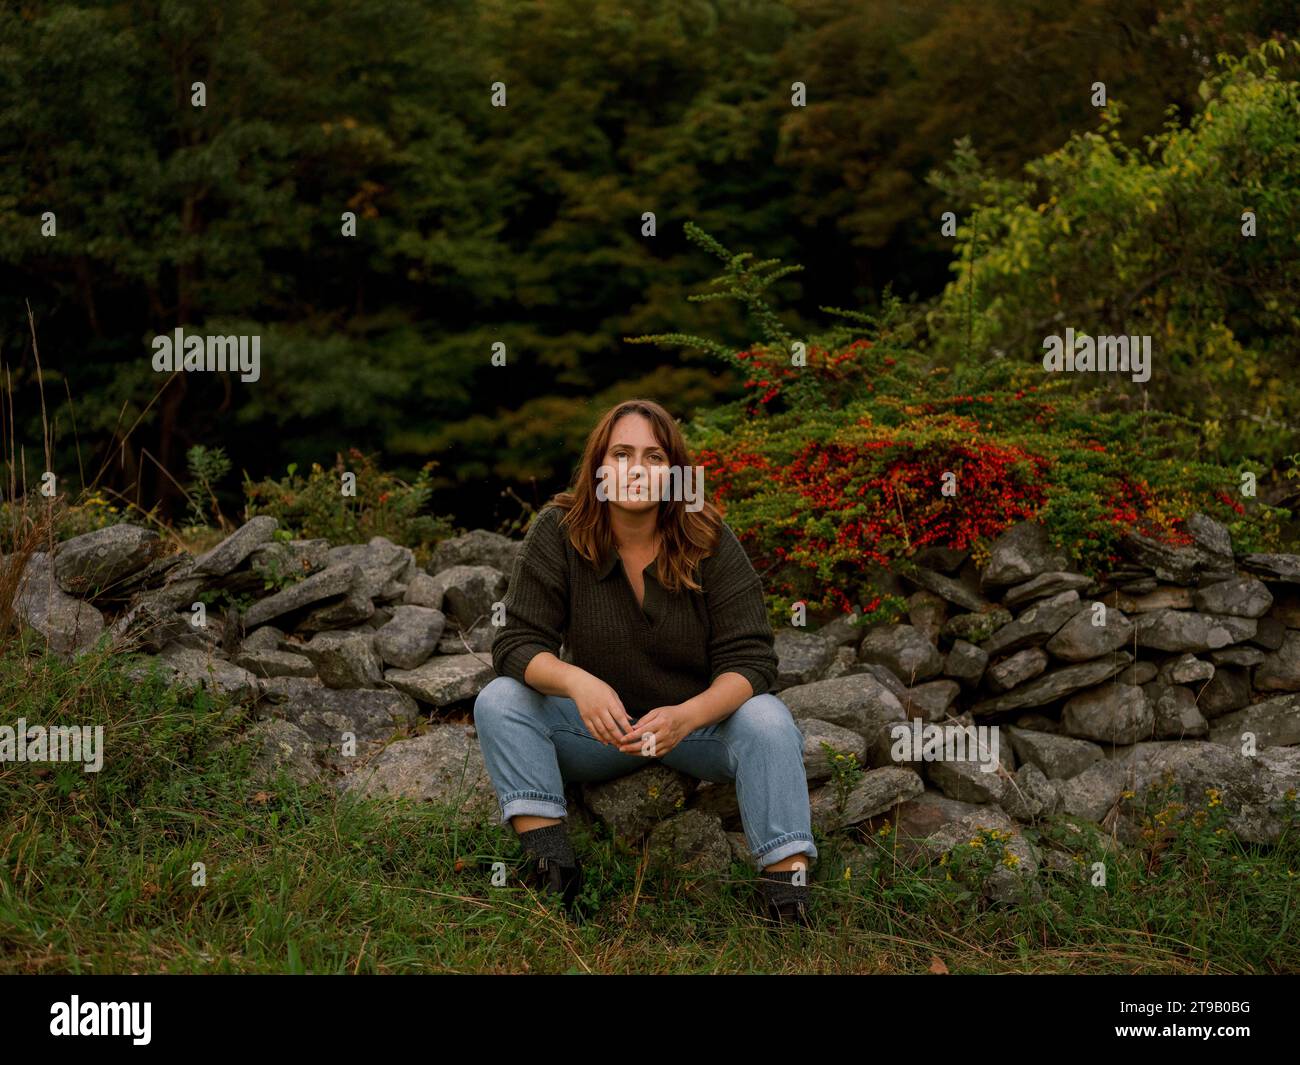 Woman sitting in forest, serious expression, facing camera among Stock Photo